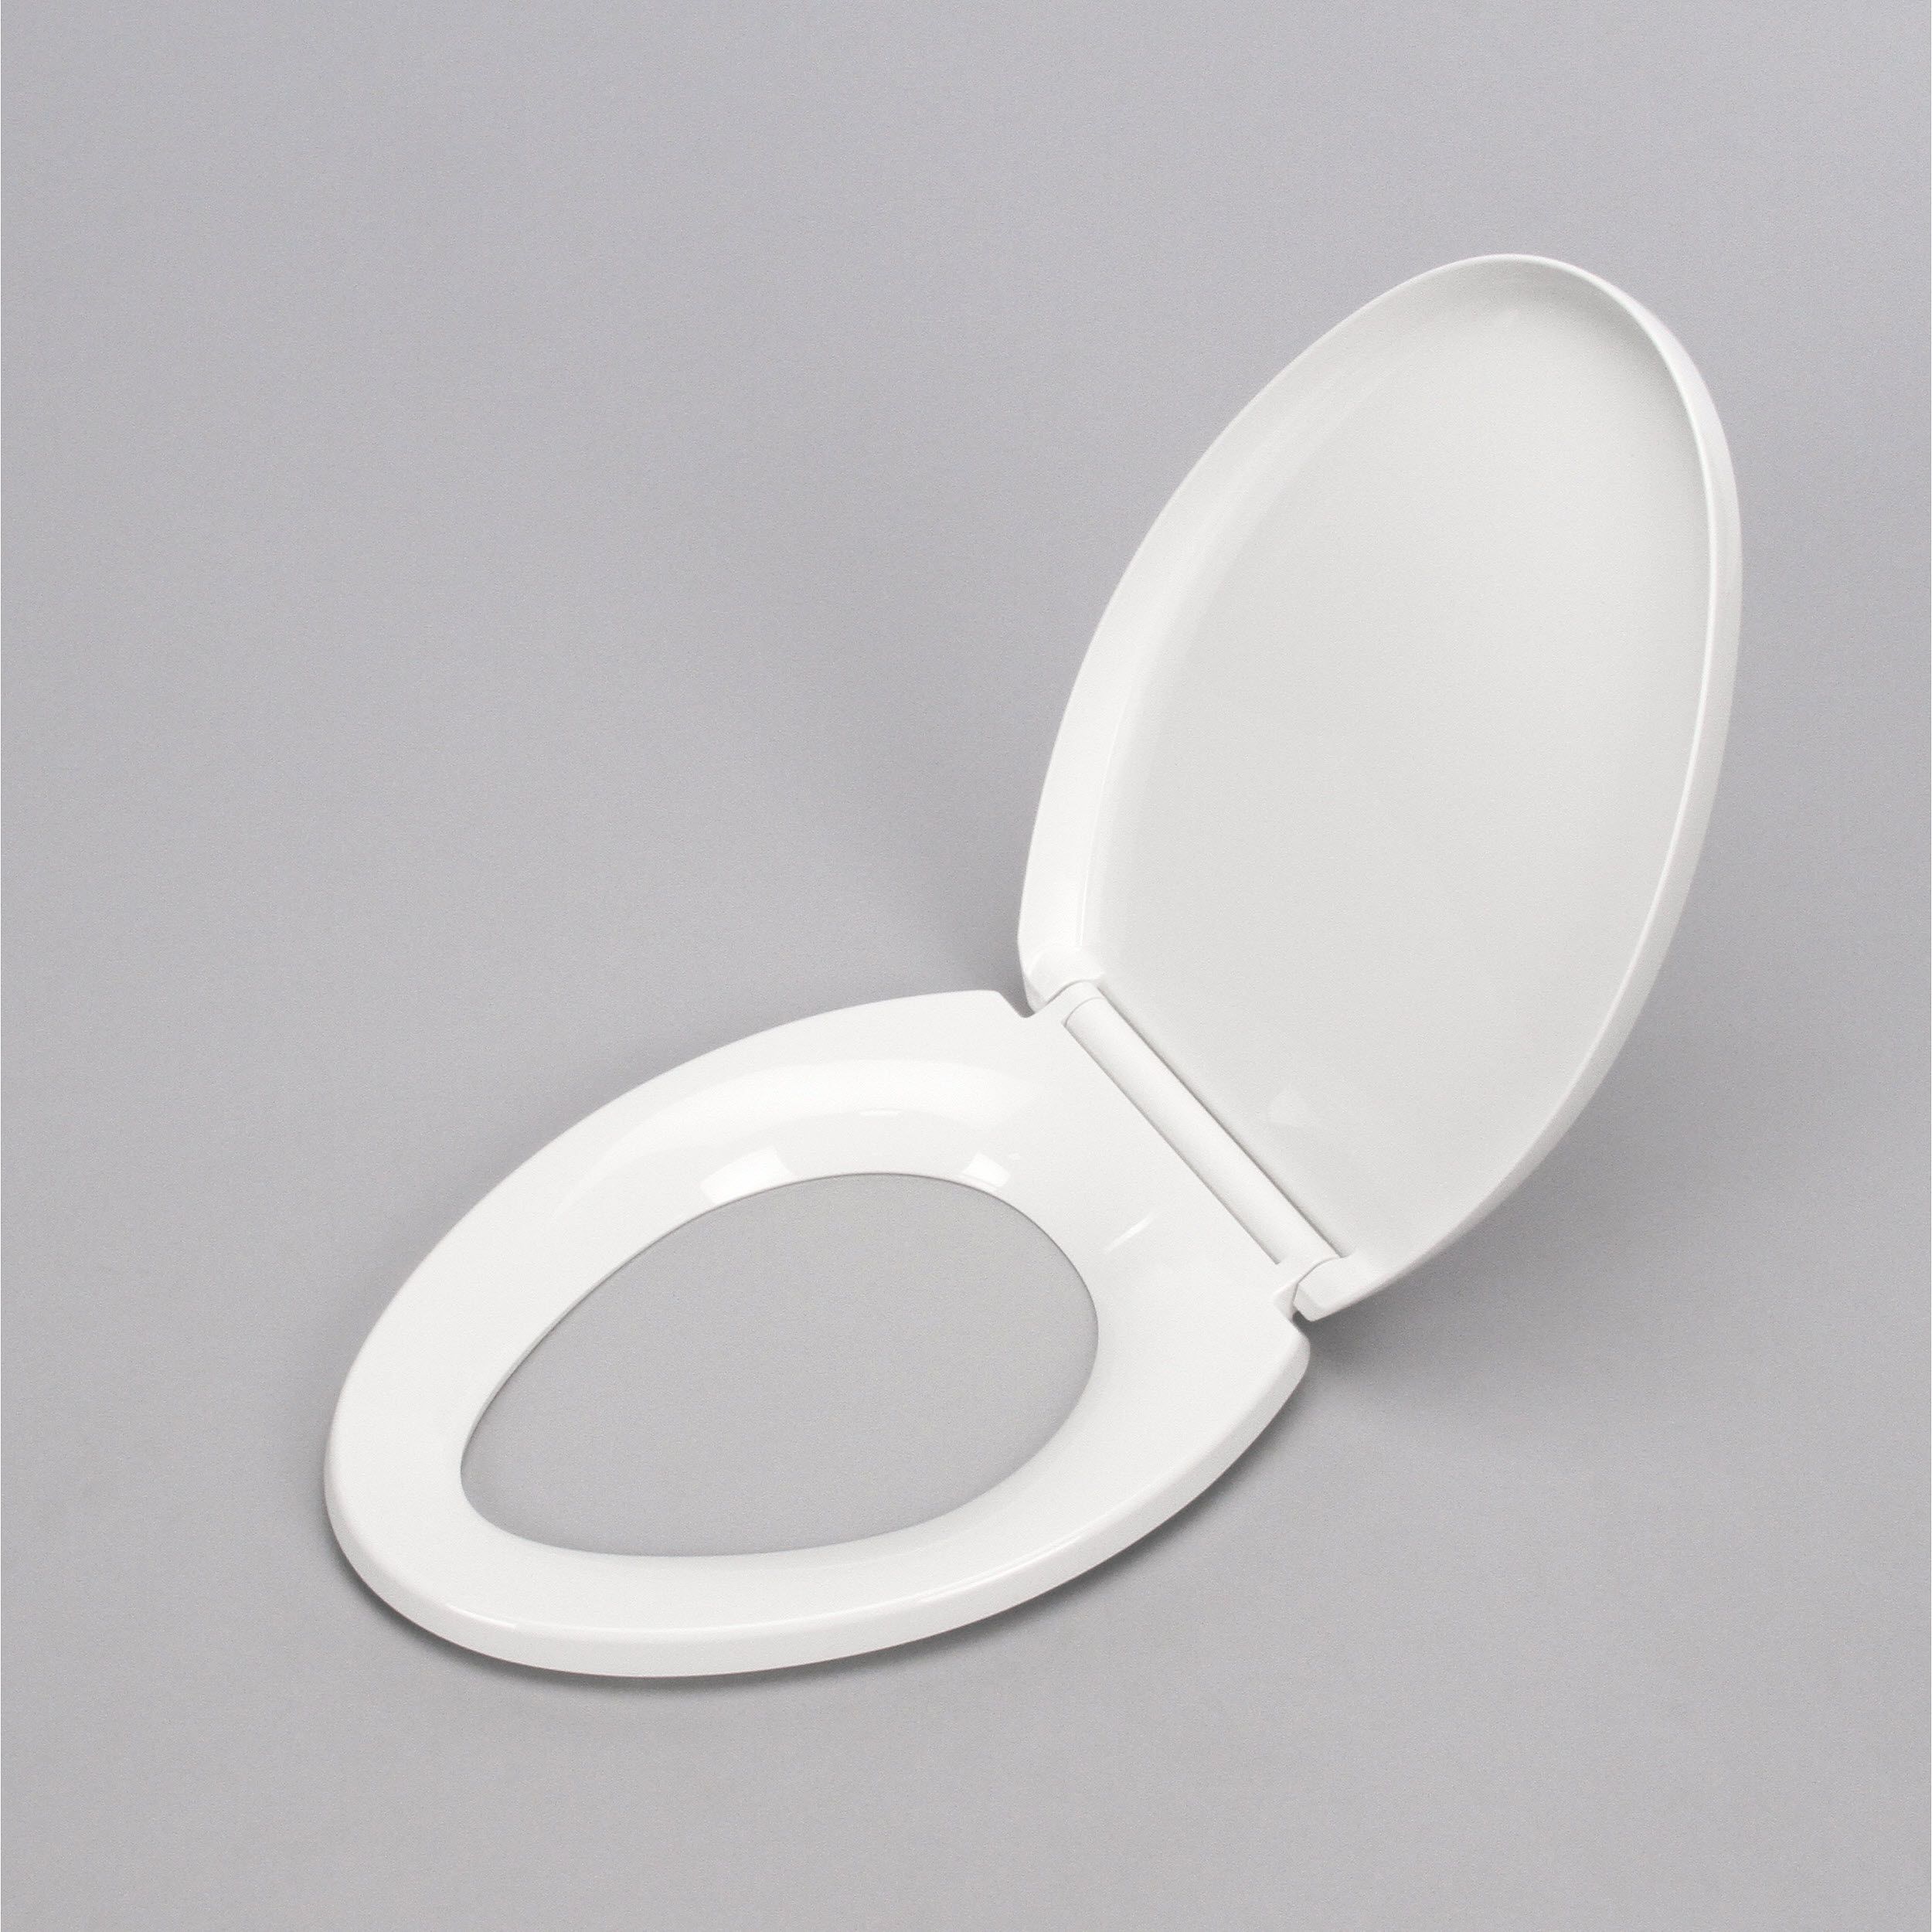 New White Hard Toilet Seat Oval Shell Shape With Hinges WC Bathroom Washroom 